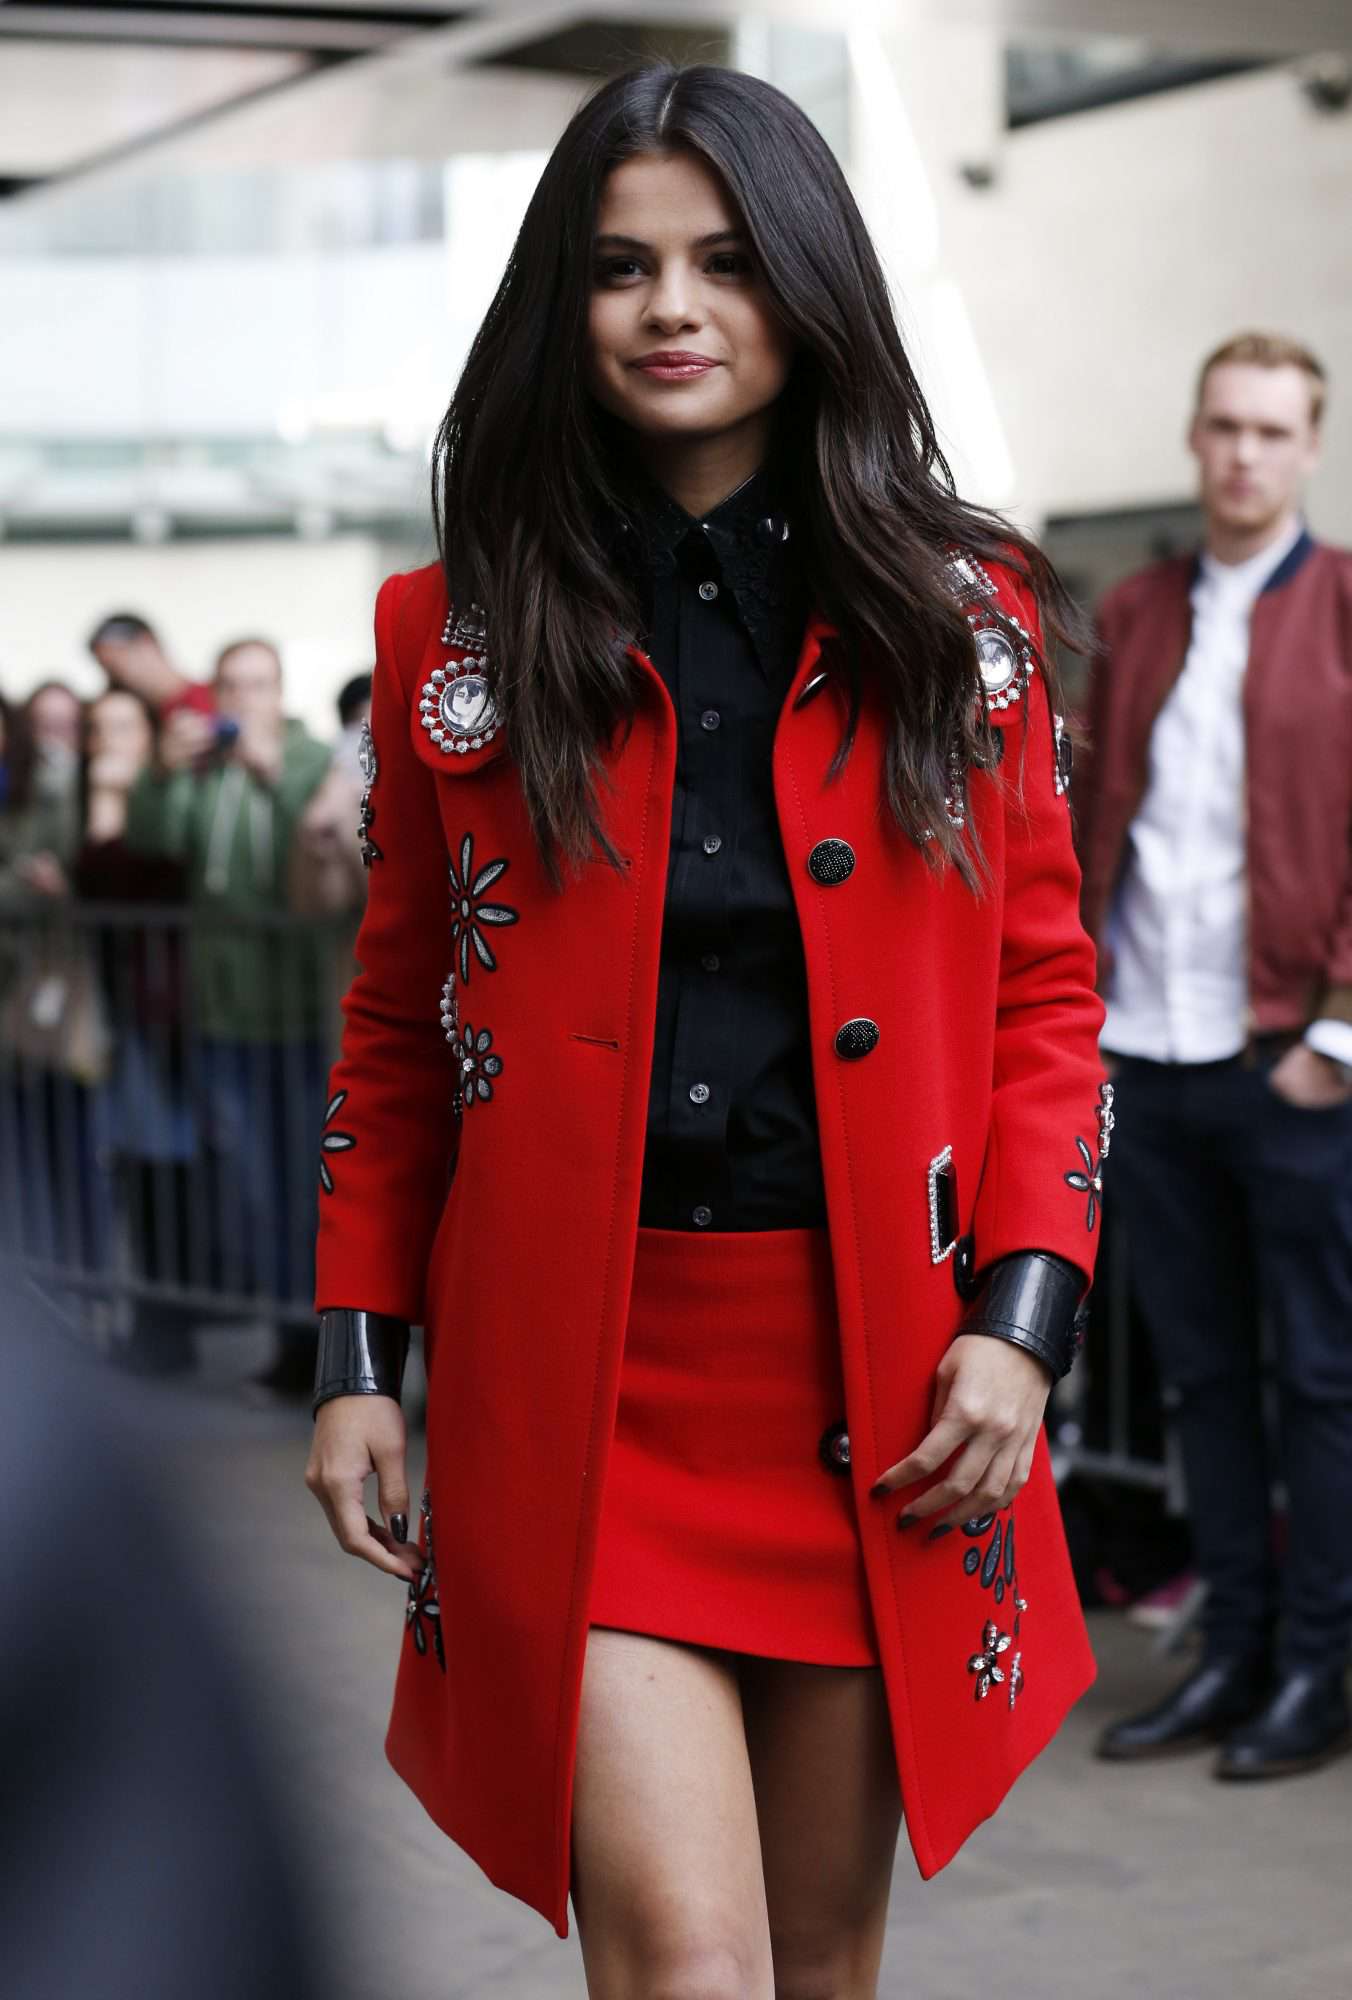 cameron staggs recommends selena gomez red leather pic